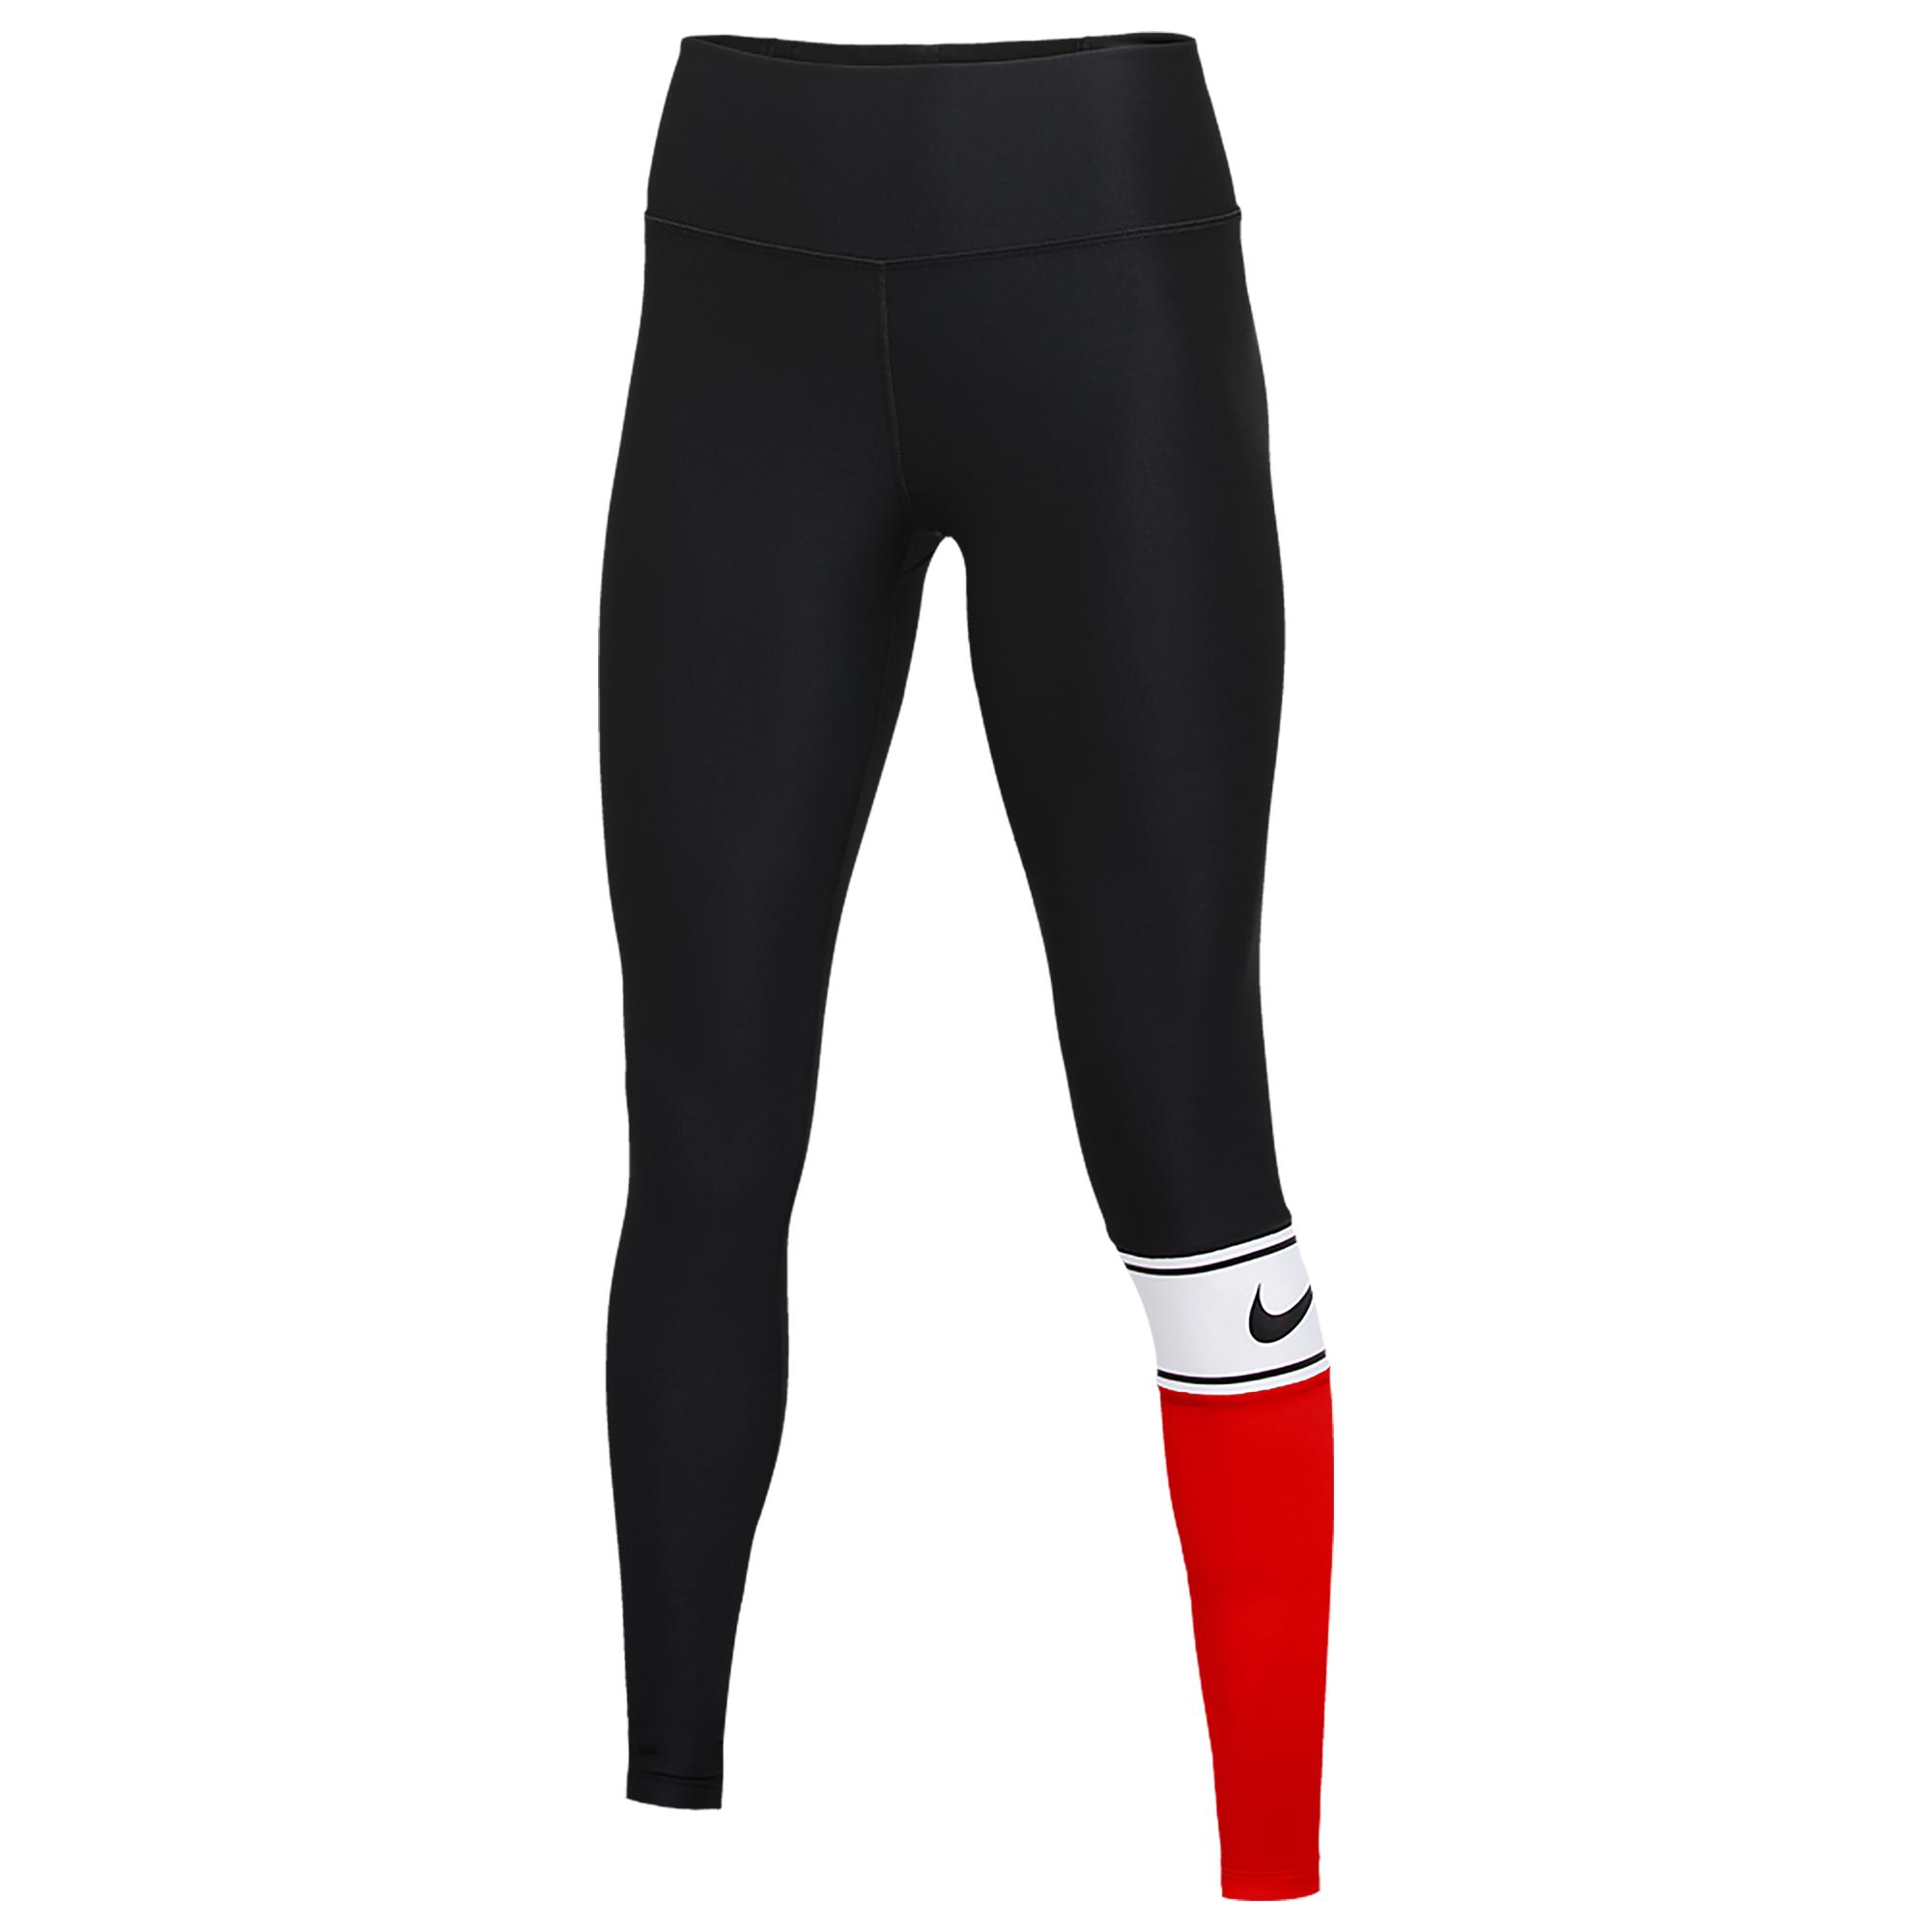 Nike Synthetic Team Authentic Colorblock Power Tights in  Black/White/University Red/Black (Black) - Lyst